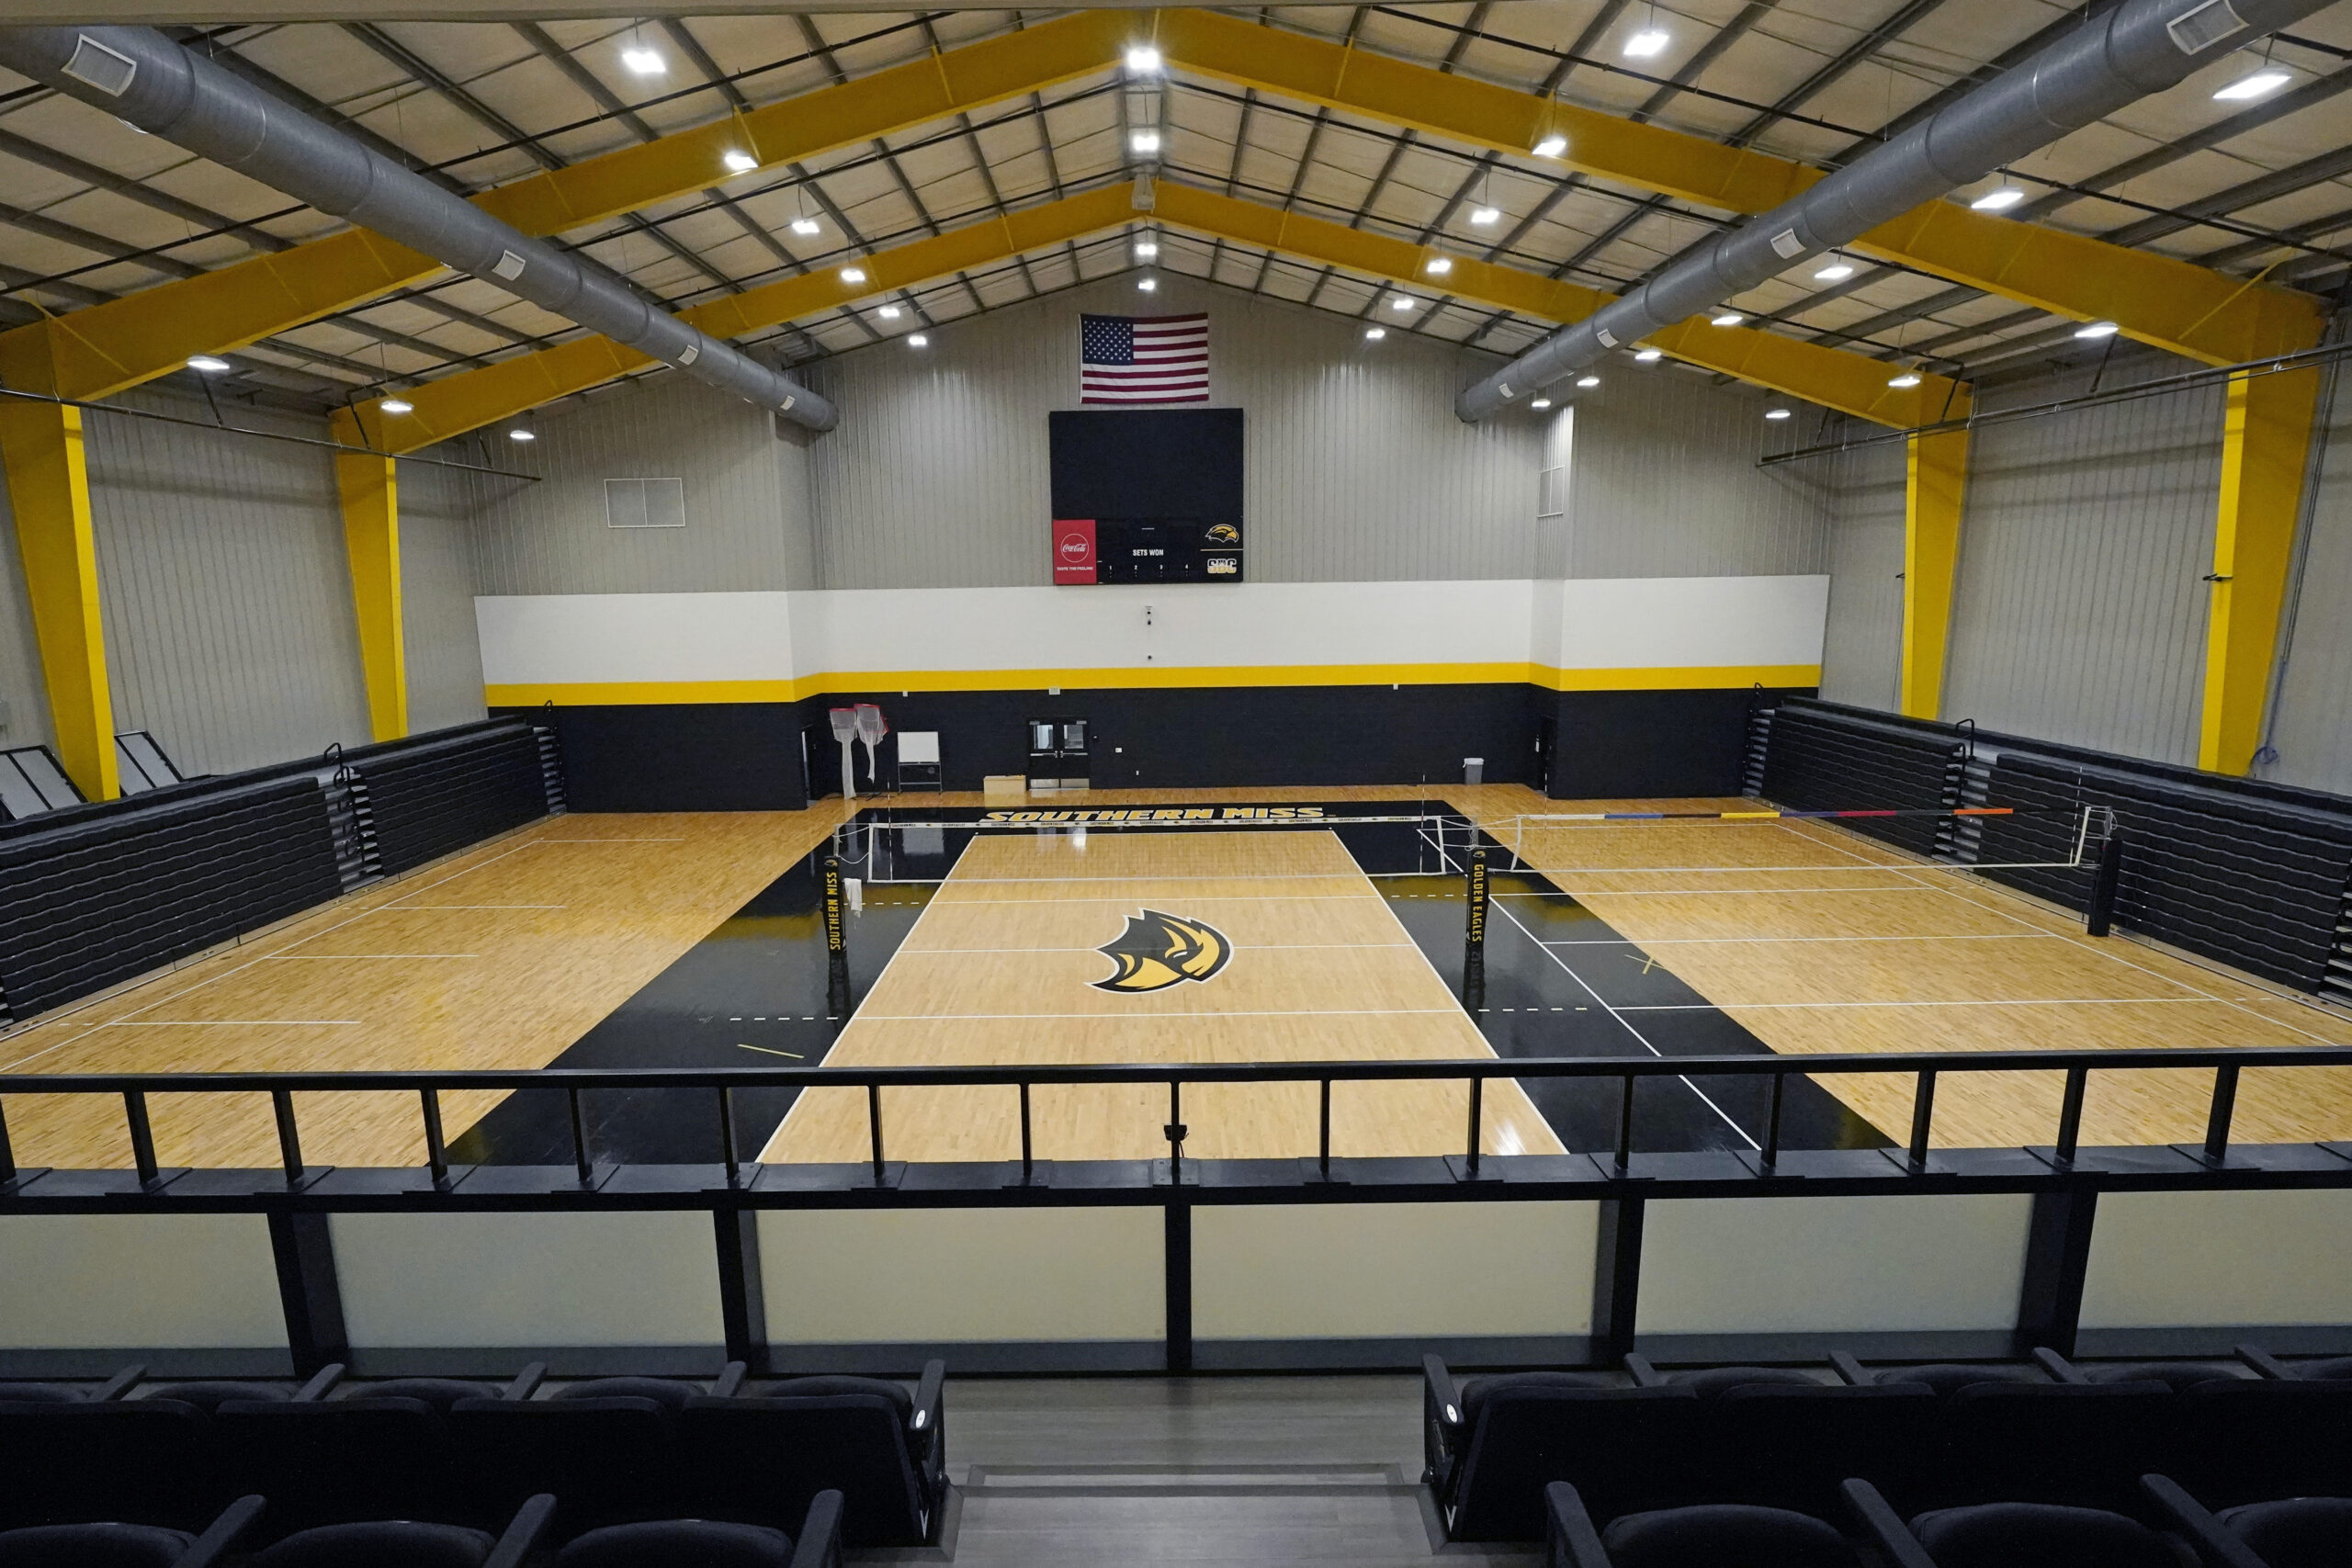 The volleyball courts at the University of Southern Mississippi in Hattiesburg, Miss.